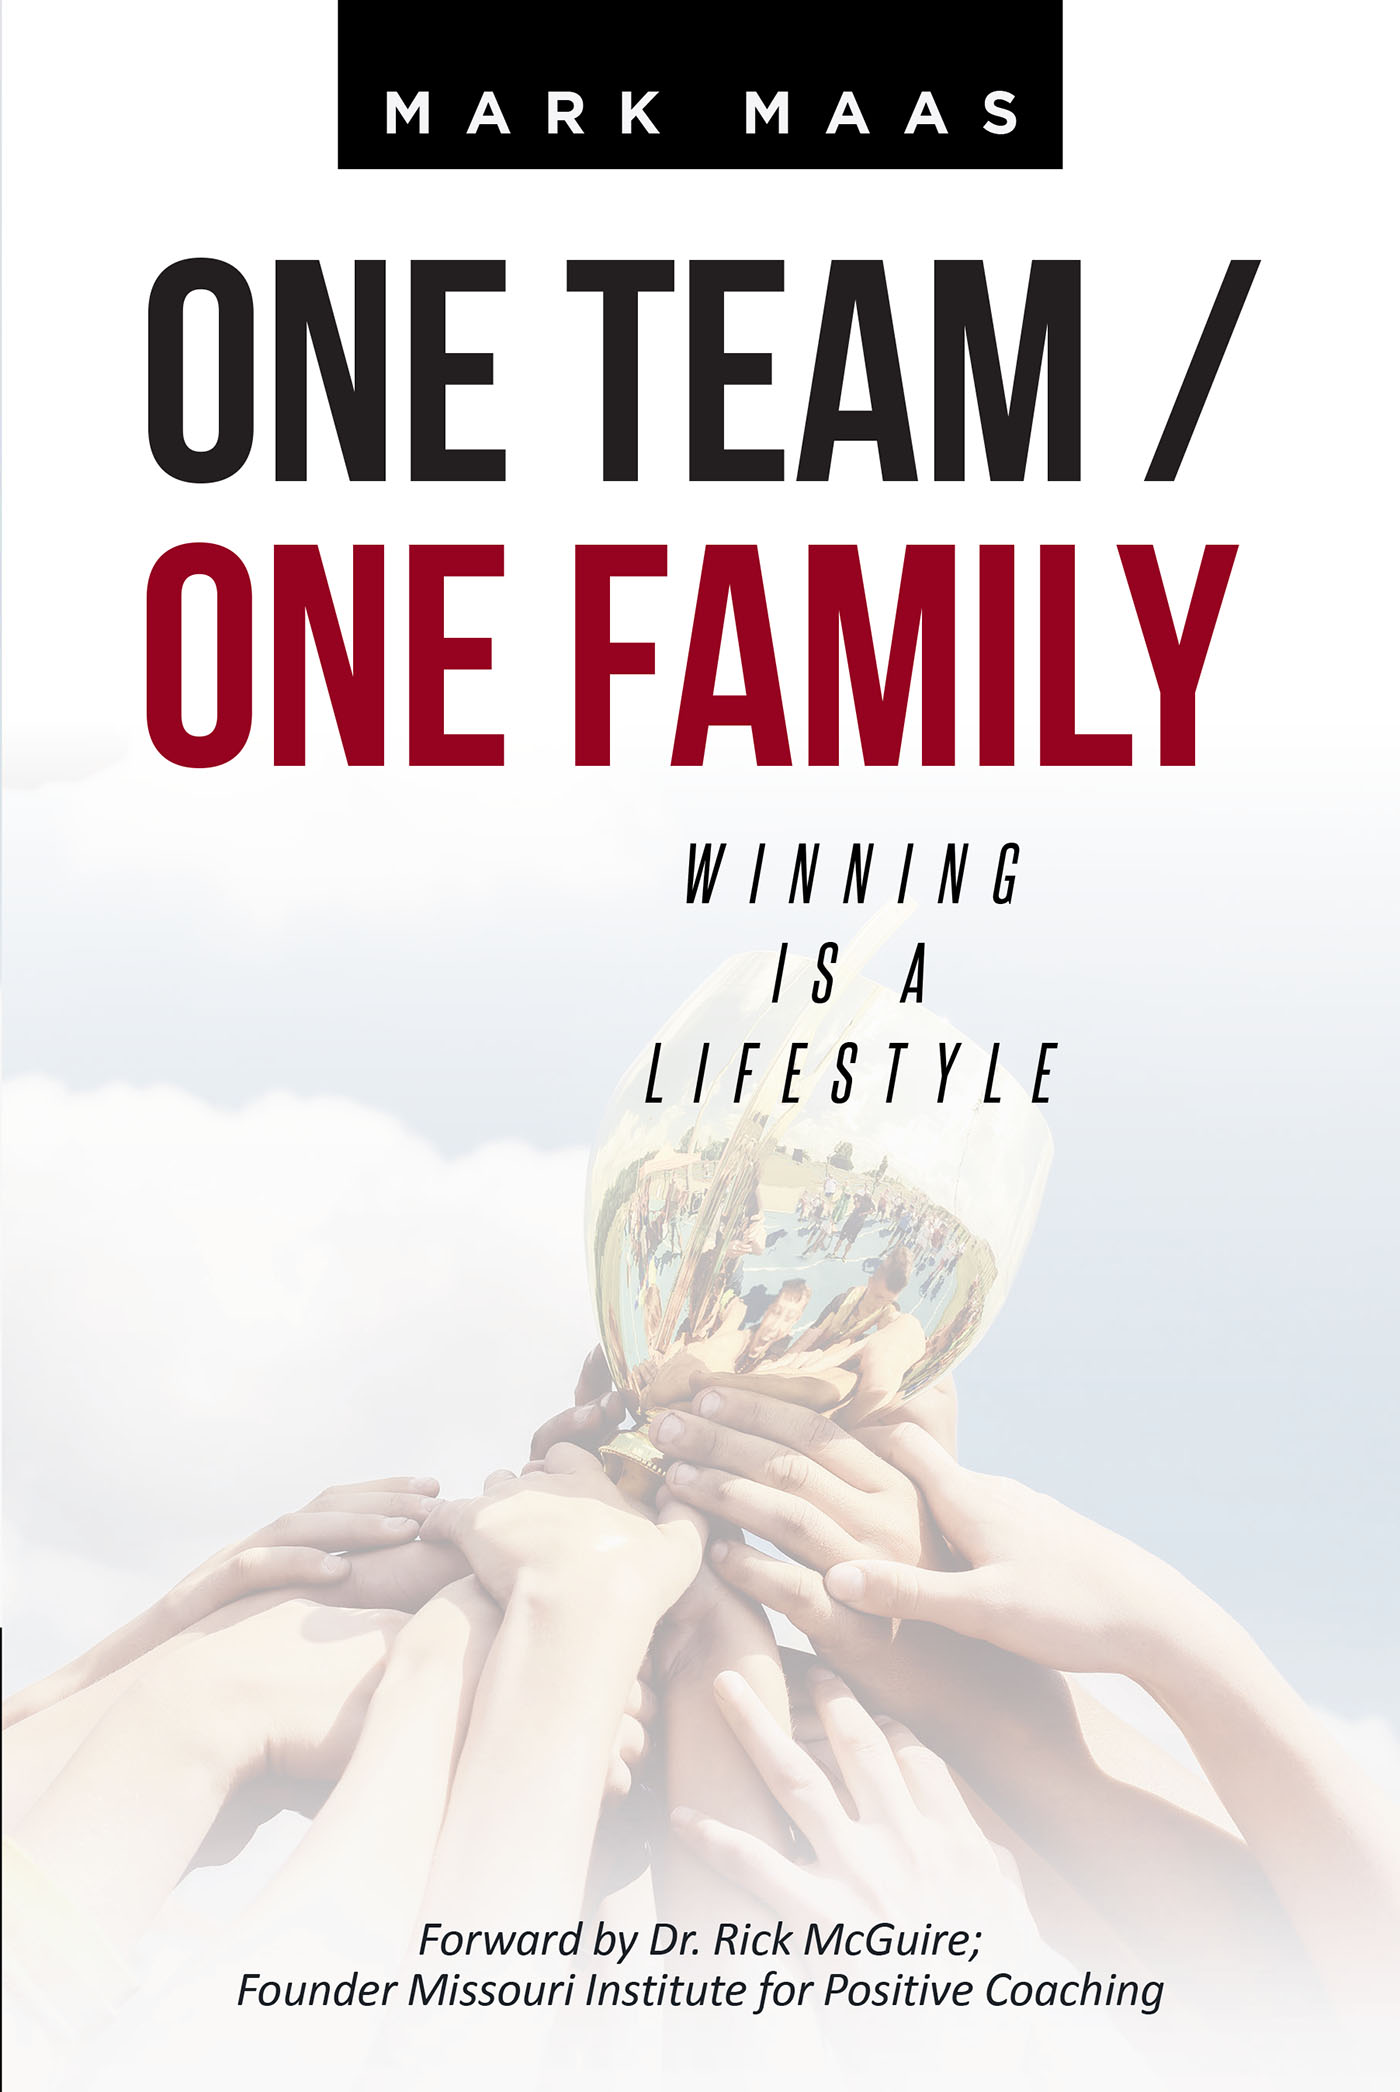 Author Mark Maas’s new book, “One Team / One Family: Winning Is a Lifestyle,” Explores the Winning Tactics Used in Athletics That Can be Applied to Every Facet of Life